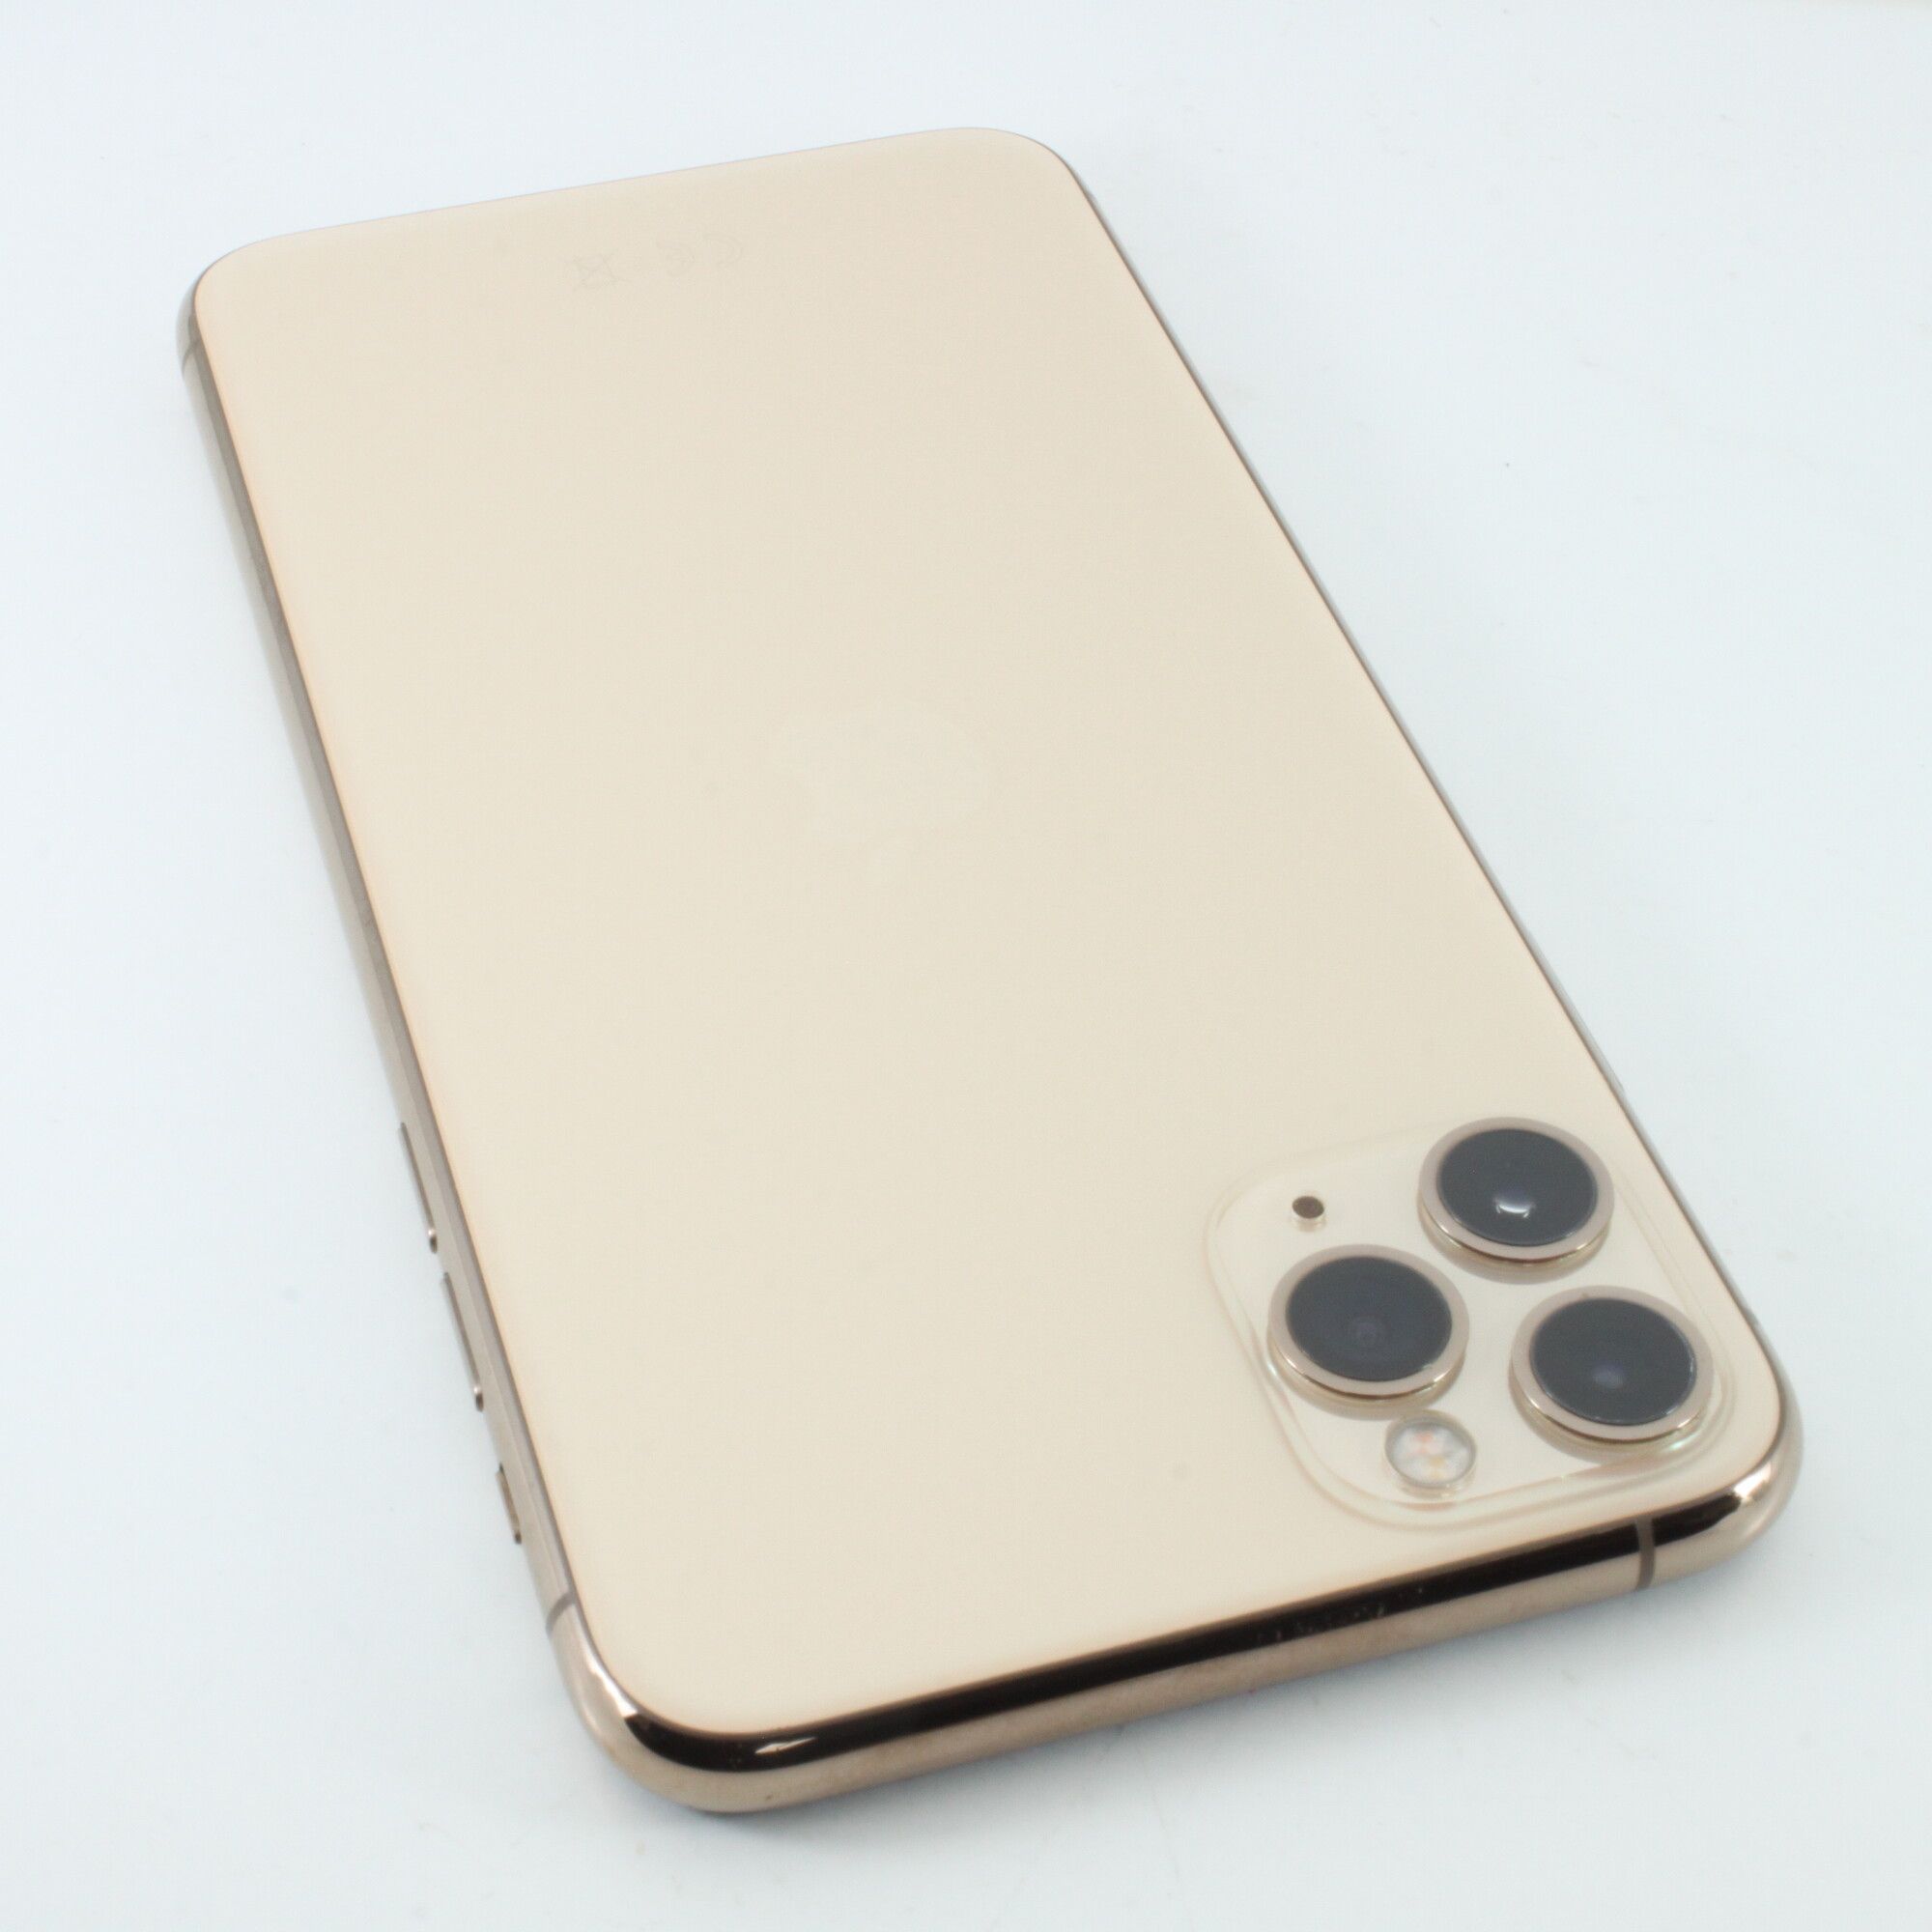 iPhone 11 Pro Max 64go reconditionné gold